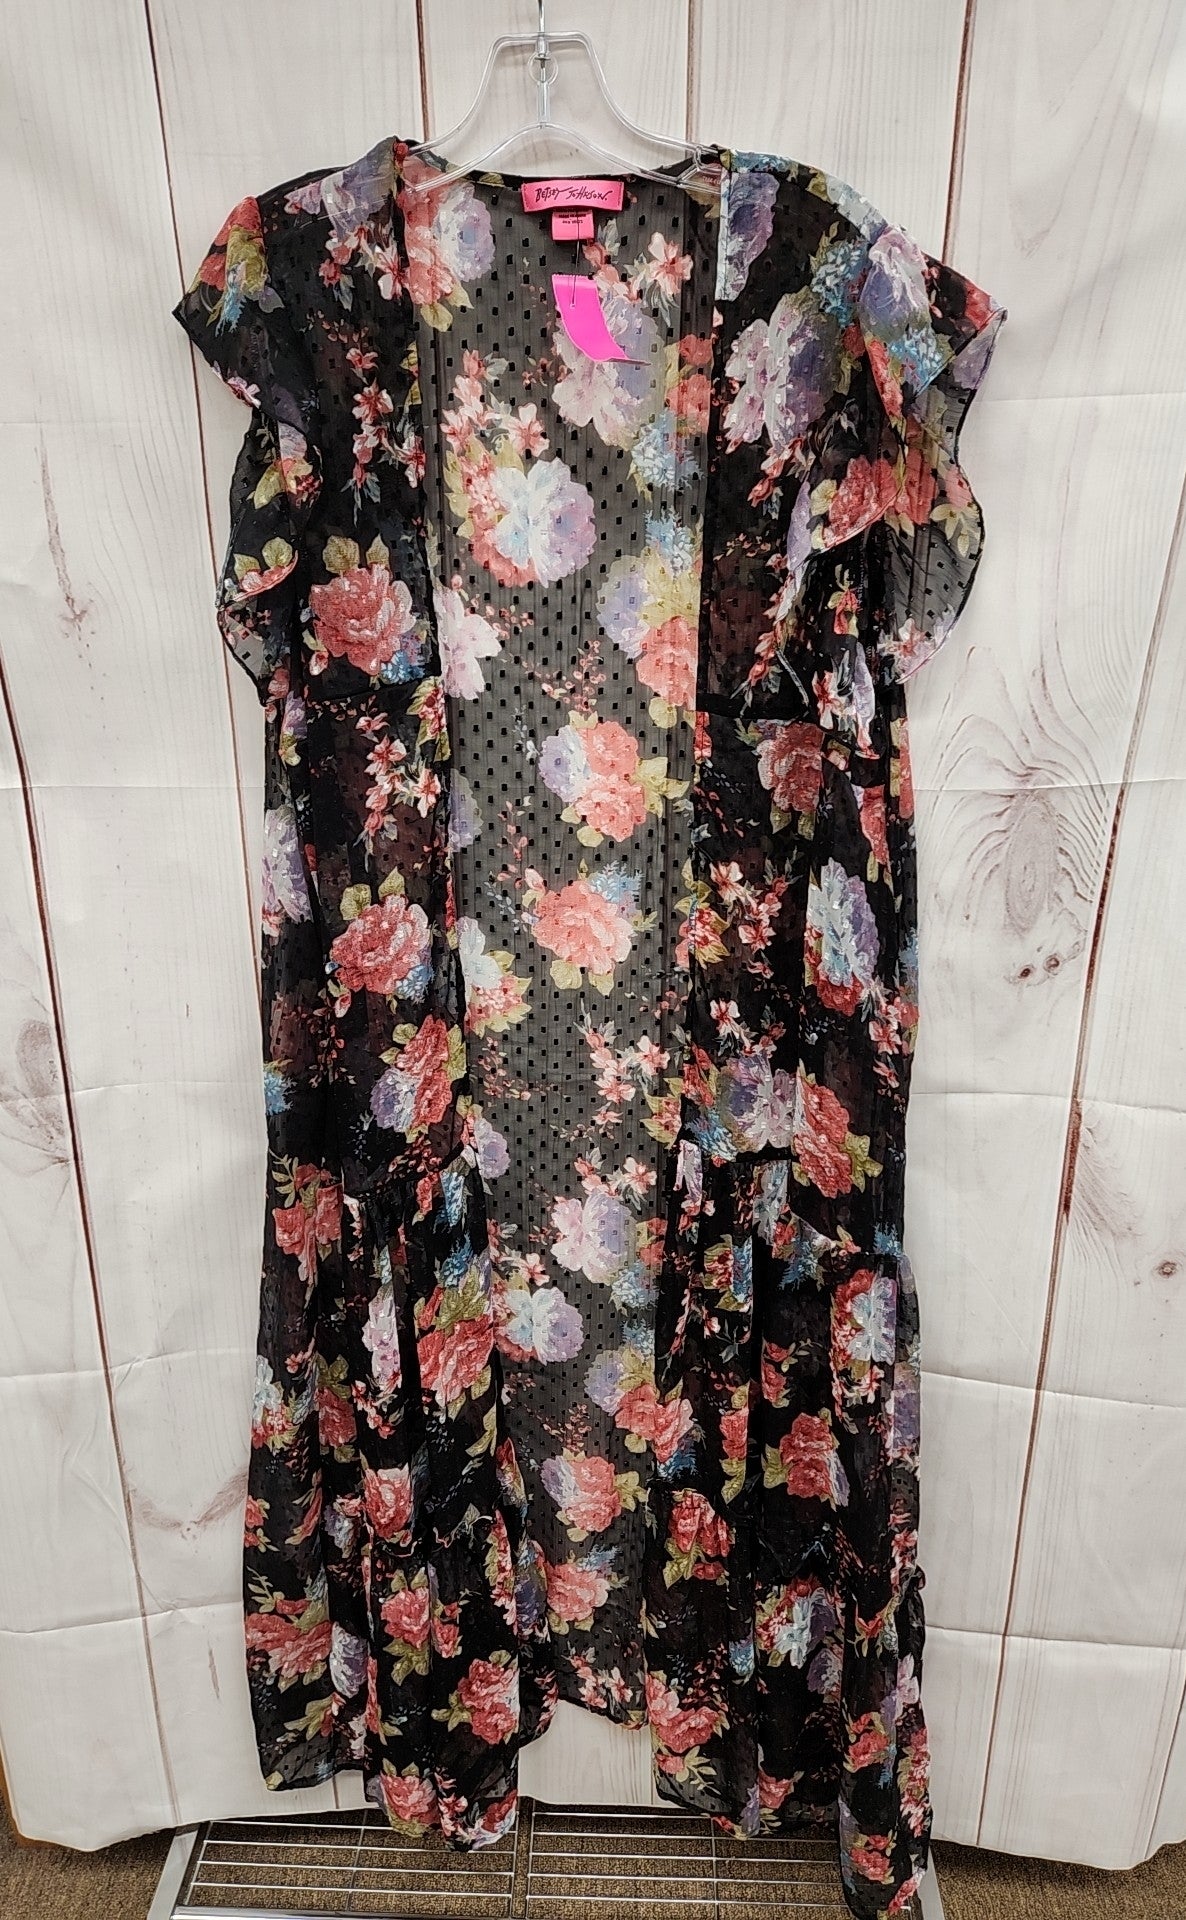 Betsey Johnson Black Floral Cover-Up